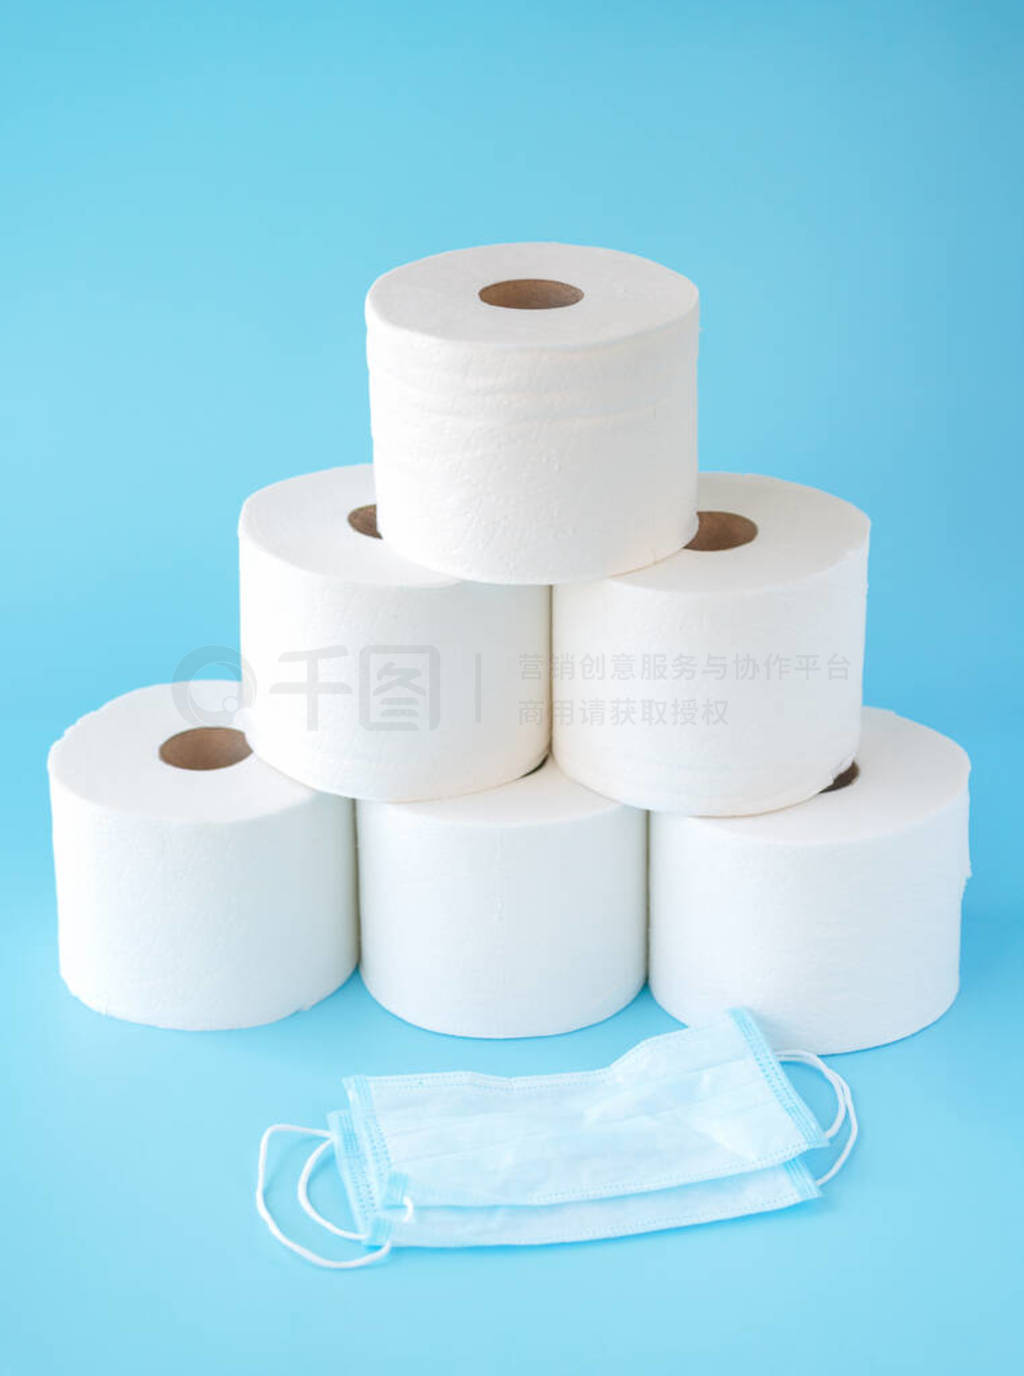 Toilet paper stacked rolls, medicine mask on a blue background.